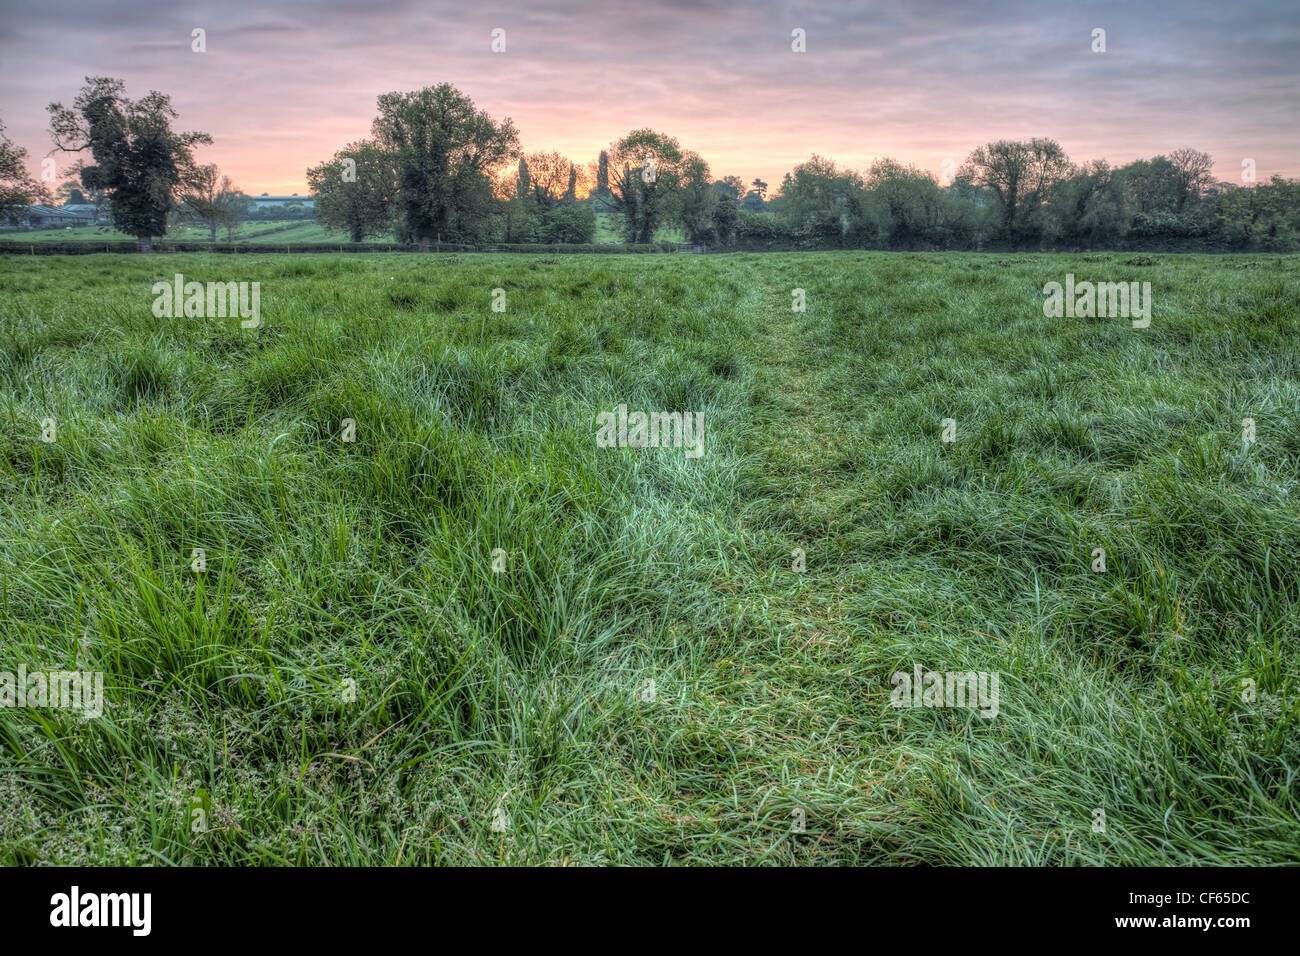 Grassy footpath across a rural field just before sunrise. Stock Photo